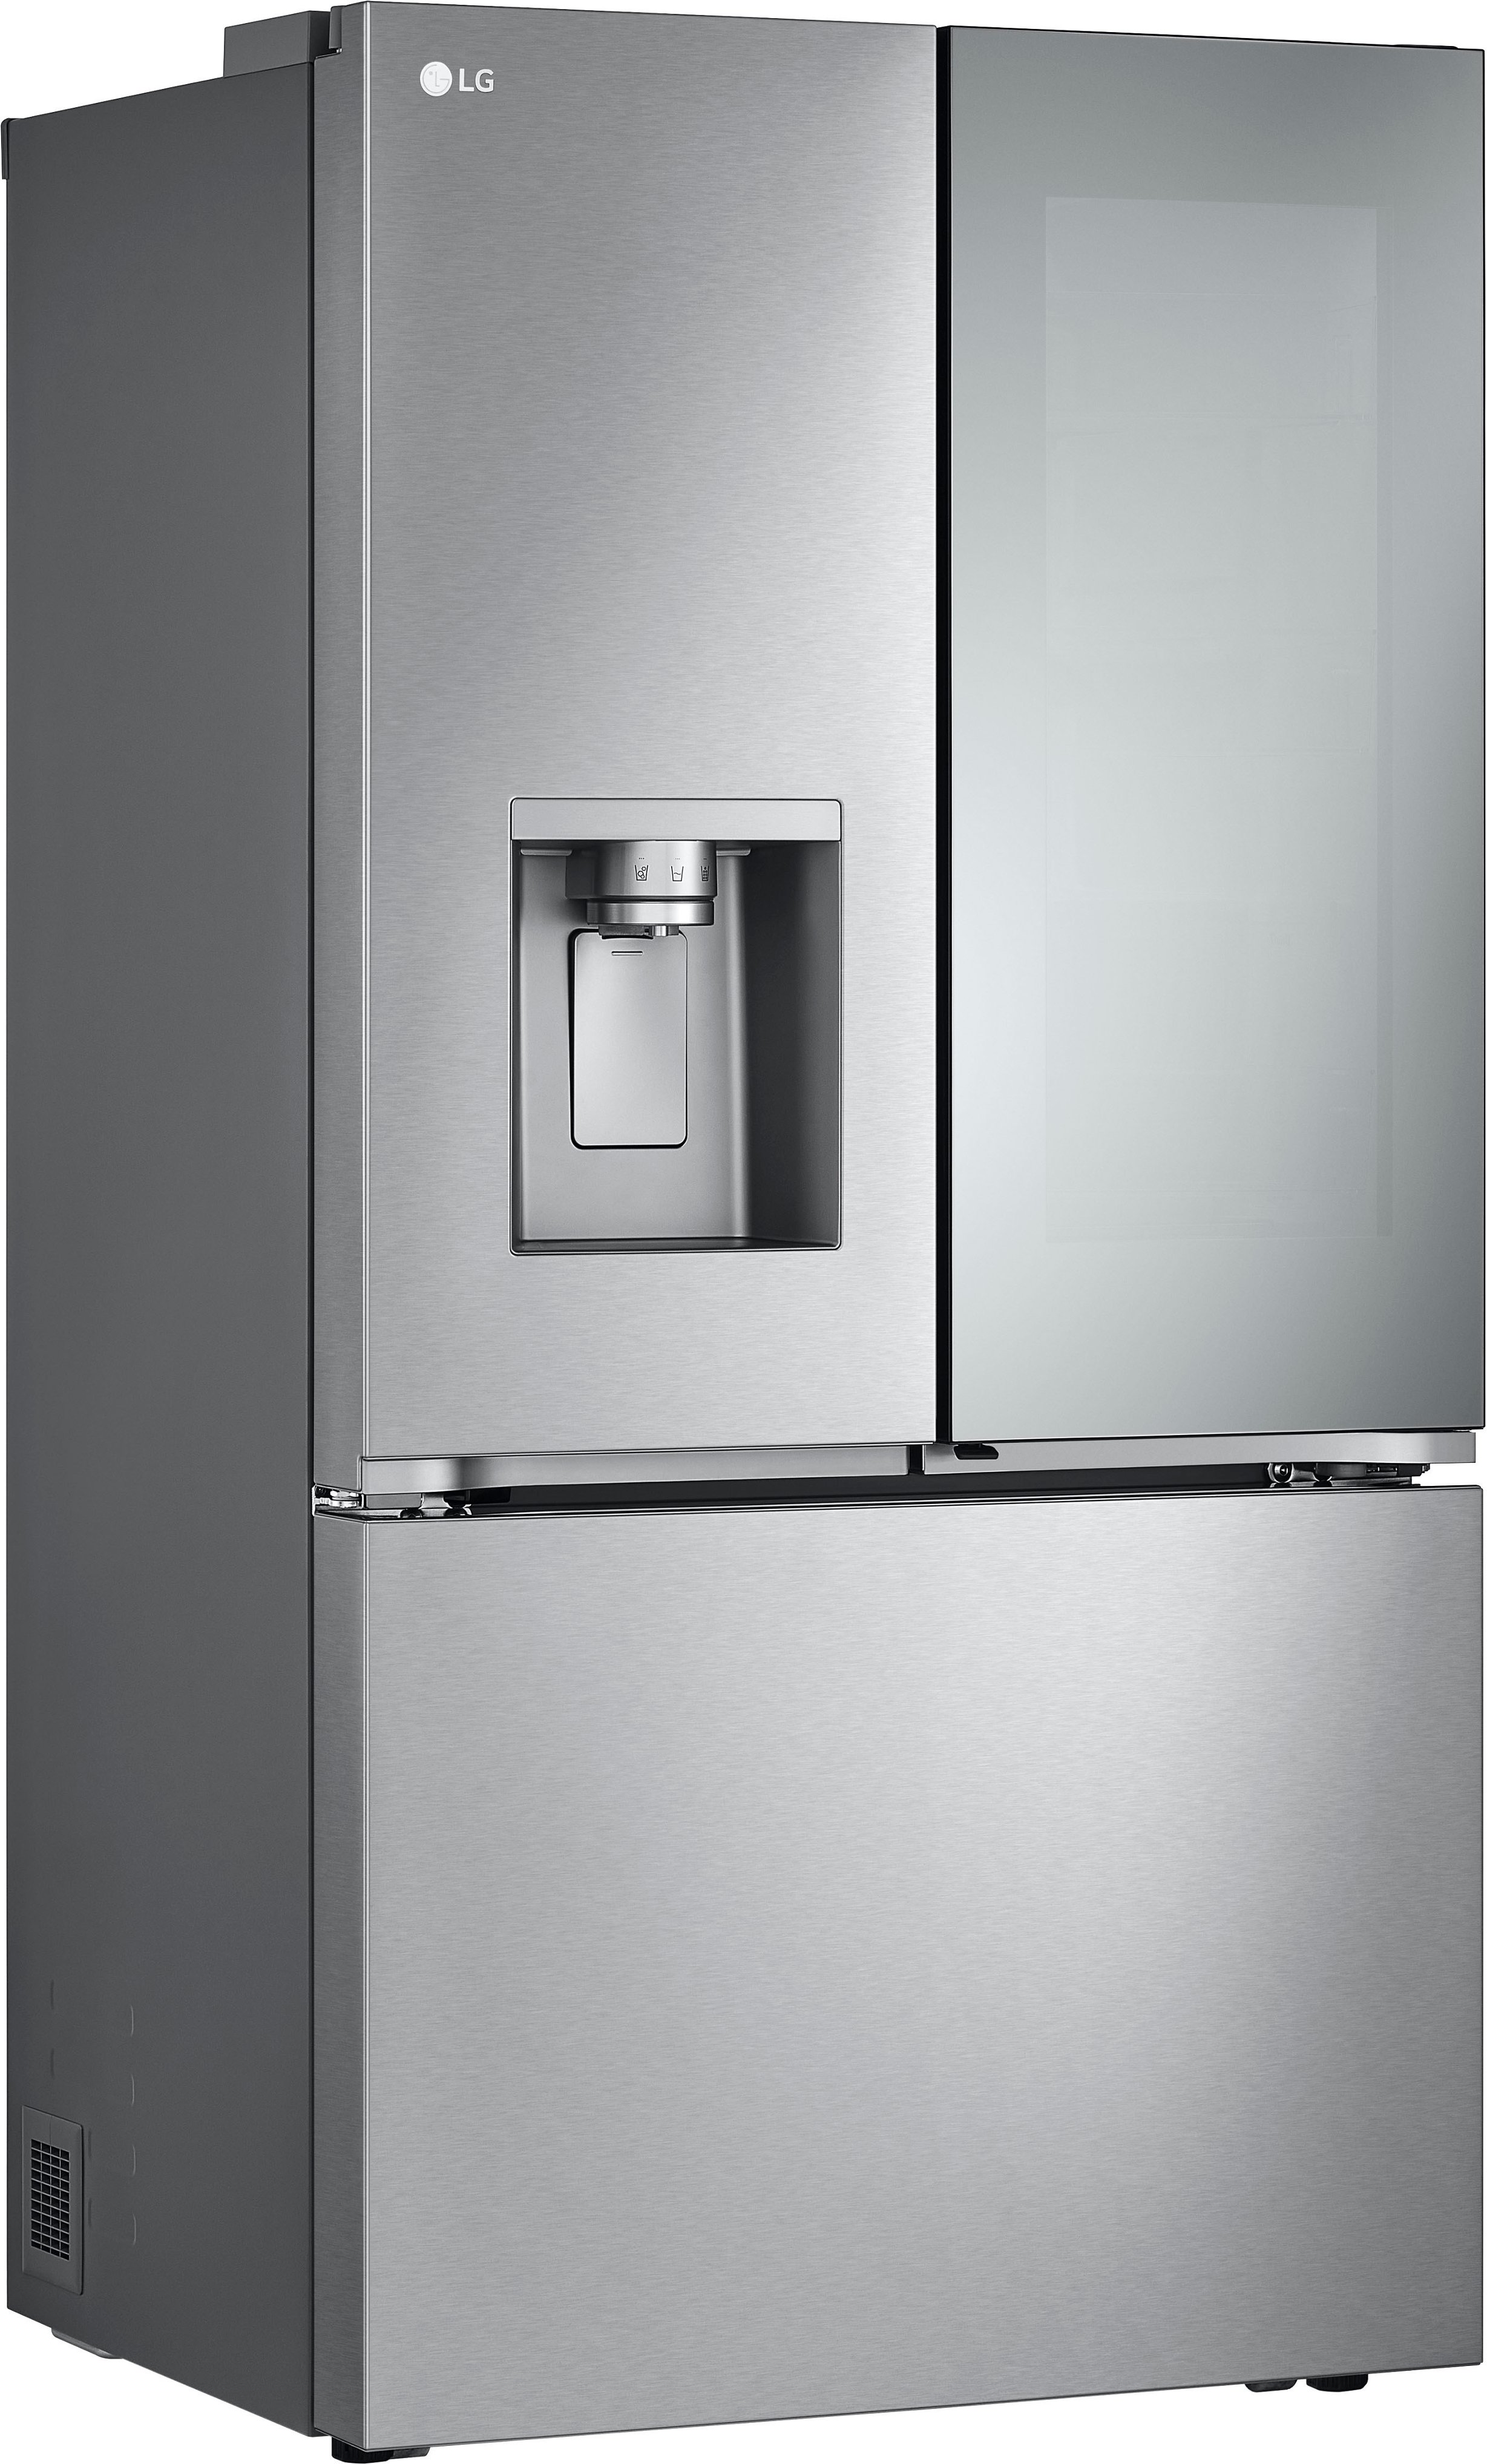 LG LRFOC2606S 36 Inch Counter-Depth MAX™ Smart French Door Refrigerator  with Extra Large 26 cu. ft. Total Capacity, WiFi, Edge-to-Edge InstaView®  Design, ThinQ®, Slim SpacePlus® Ice System, Dual Ice Makers, Door Cooling+